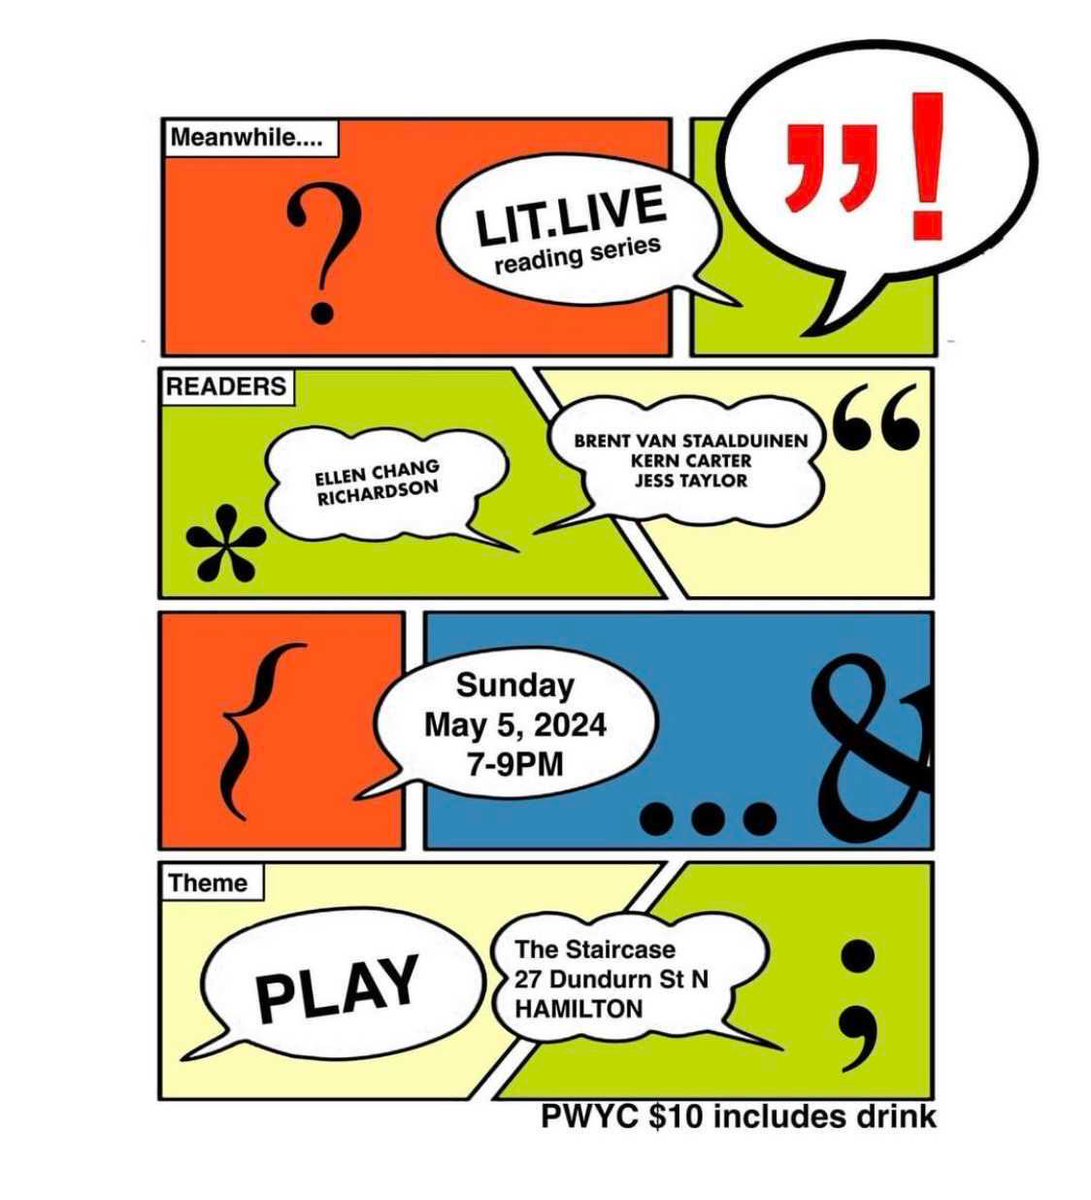 Delve into the theme of 'Play' with authors Ellen Chang Richardson, Brent van Staalduinen, Kern Carter, and Jess Taylor at the LitLive Reading Series. For event details, visit @LitLiveReadungs. #readingseries #authorsofinstagram #poetry #fiction #canlit #hamont